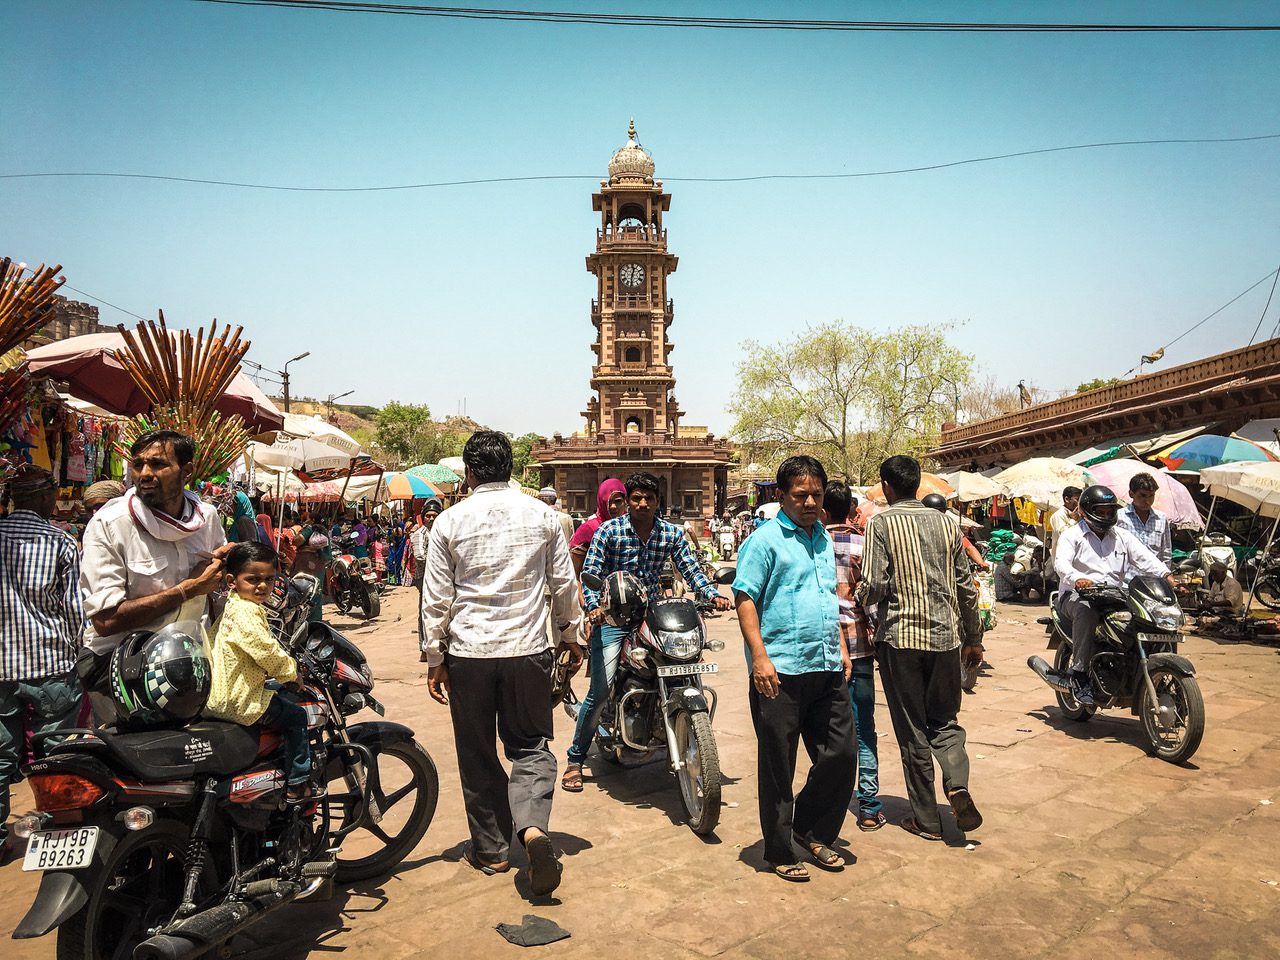 What to do in Jodhpur?  Visit the central square